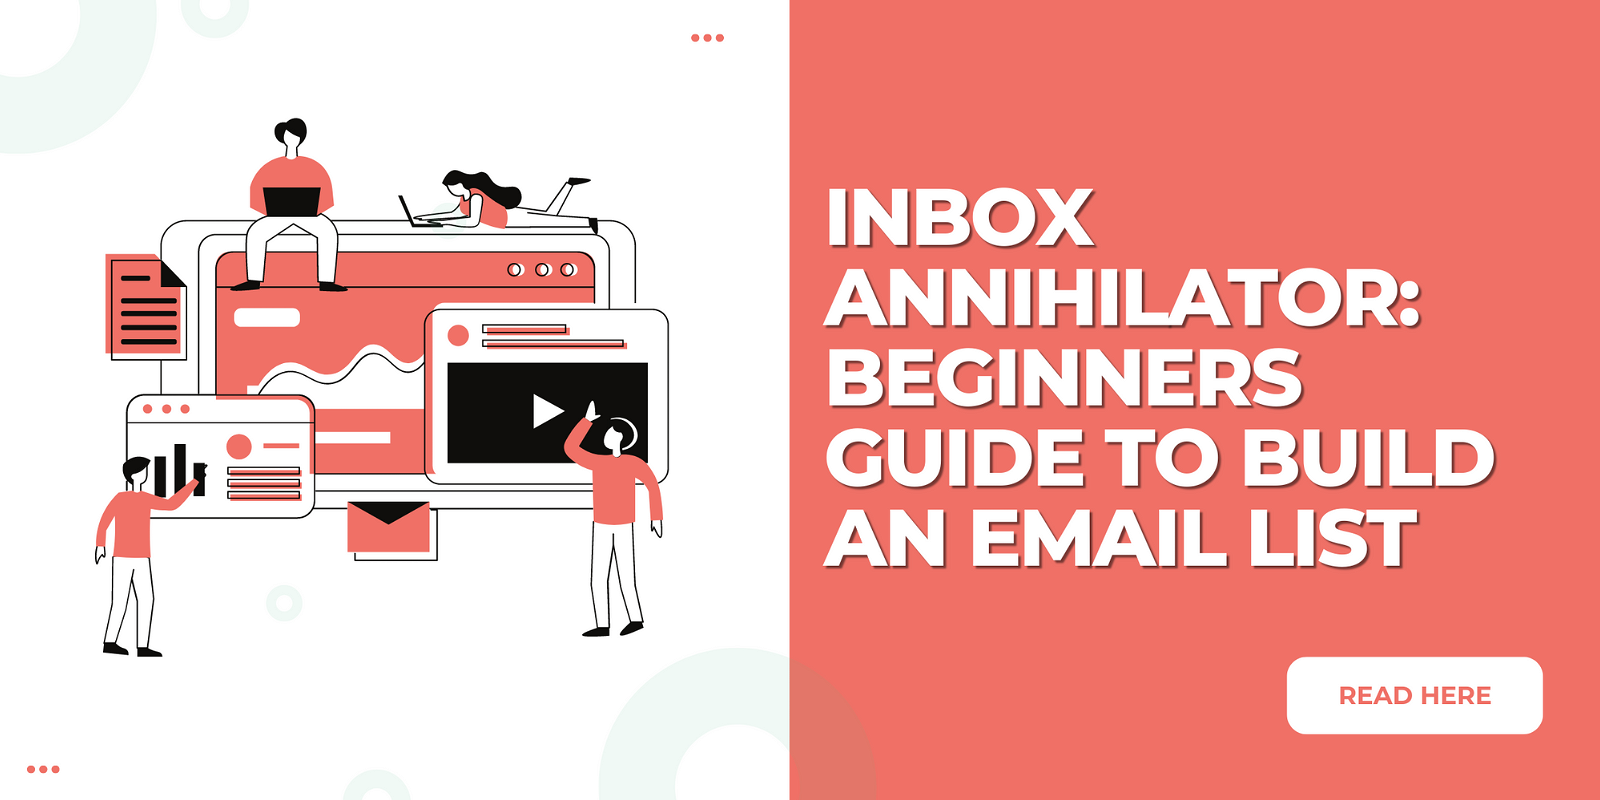 Inbox Annihilator: Beginners Guide To Build An Email List